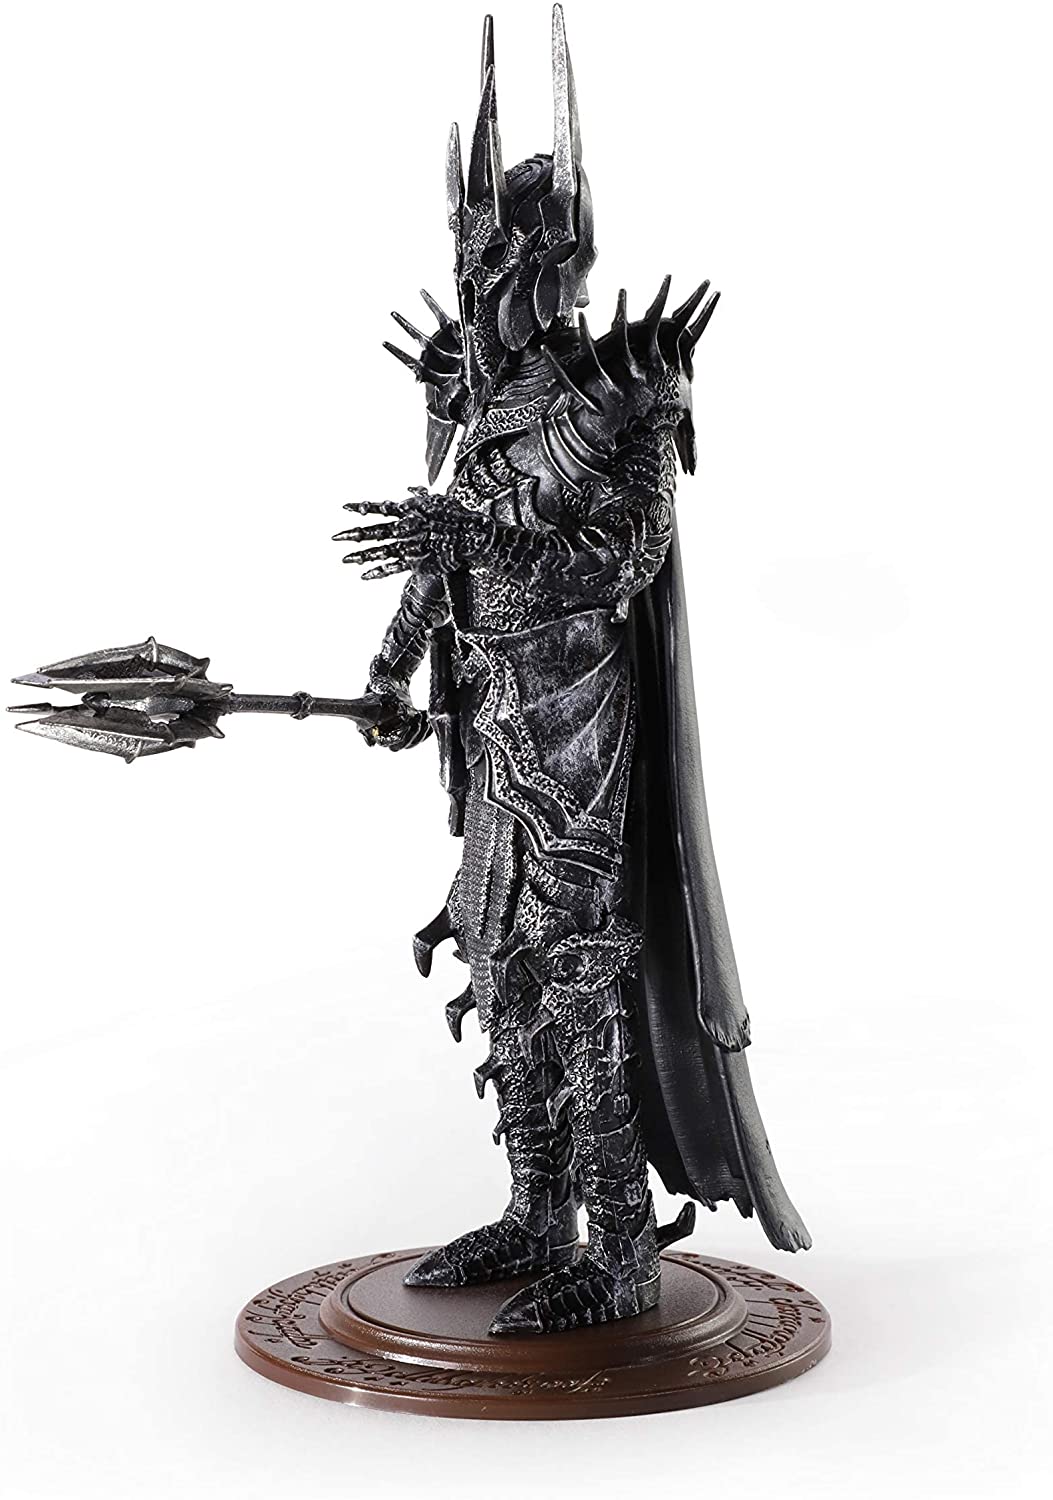 The Noble Collection LoTR Bendyfigs Sauron - Officially Licensed 19cm (7.5 inch) Lord Of The Rings Bendable Posable Collectable Doll Figures With Stand